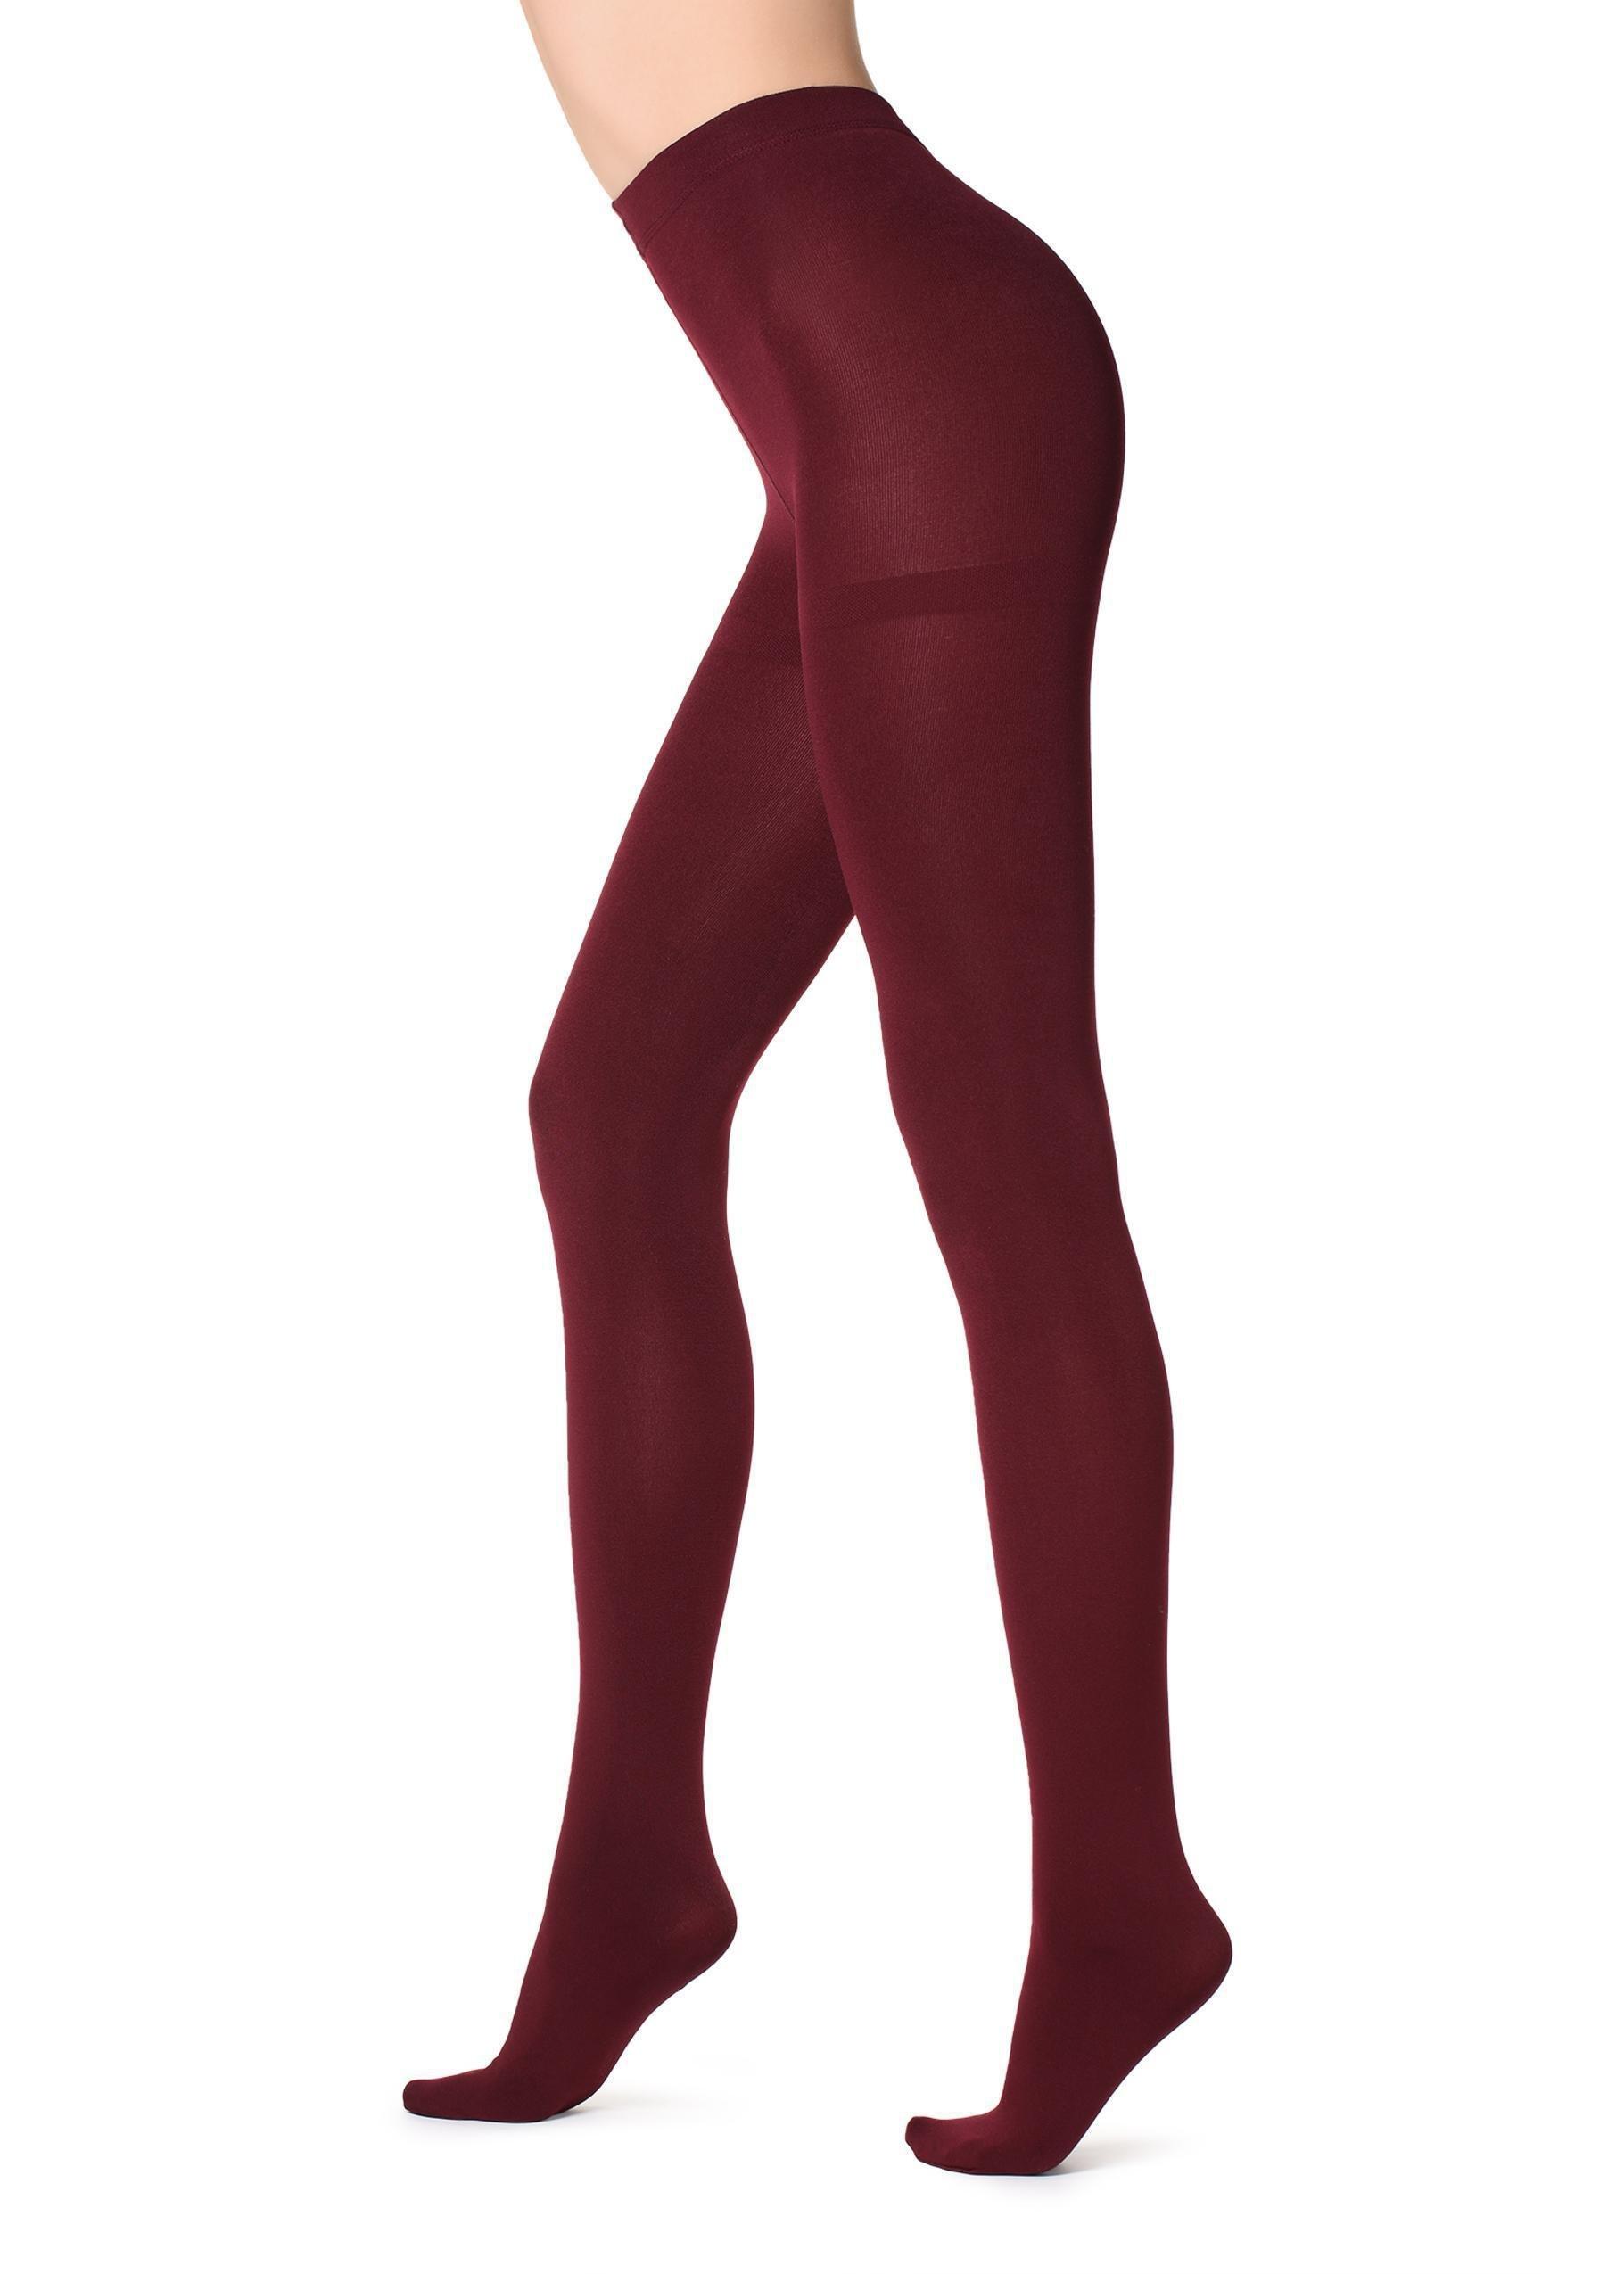 Calzedonia Burgundy Thermal Super Opaque Tights